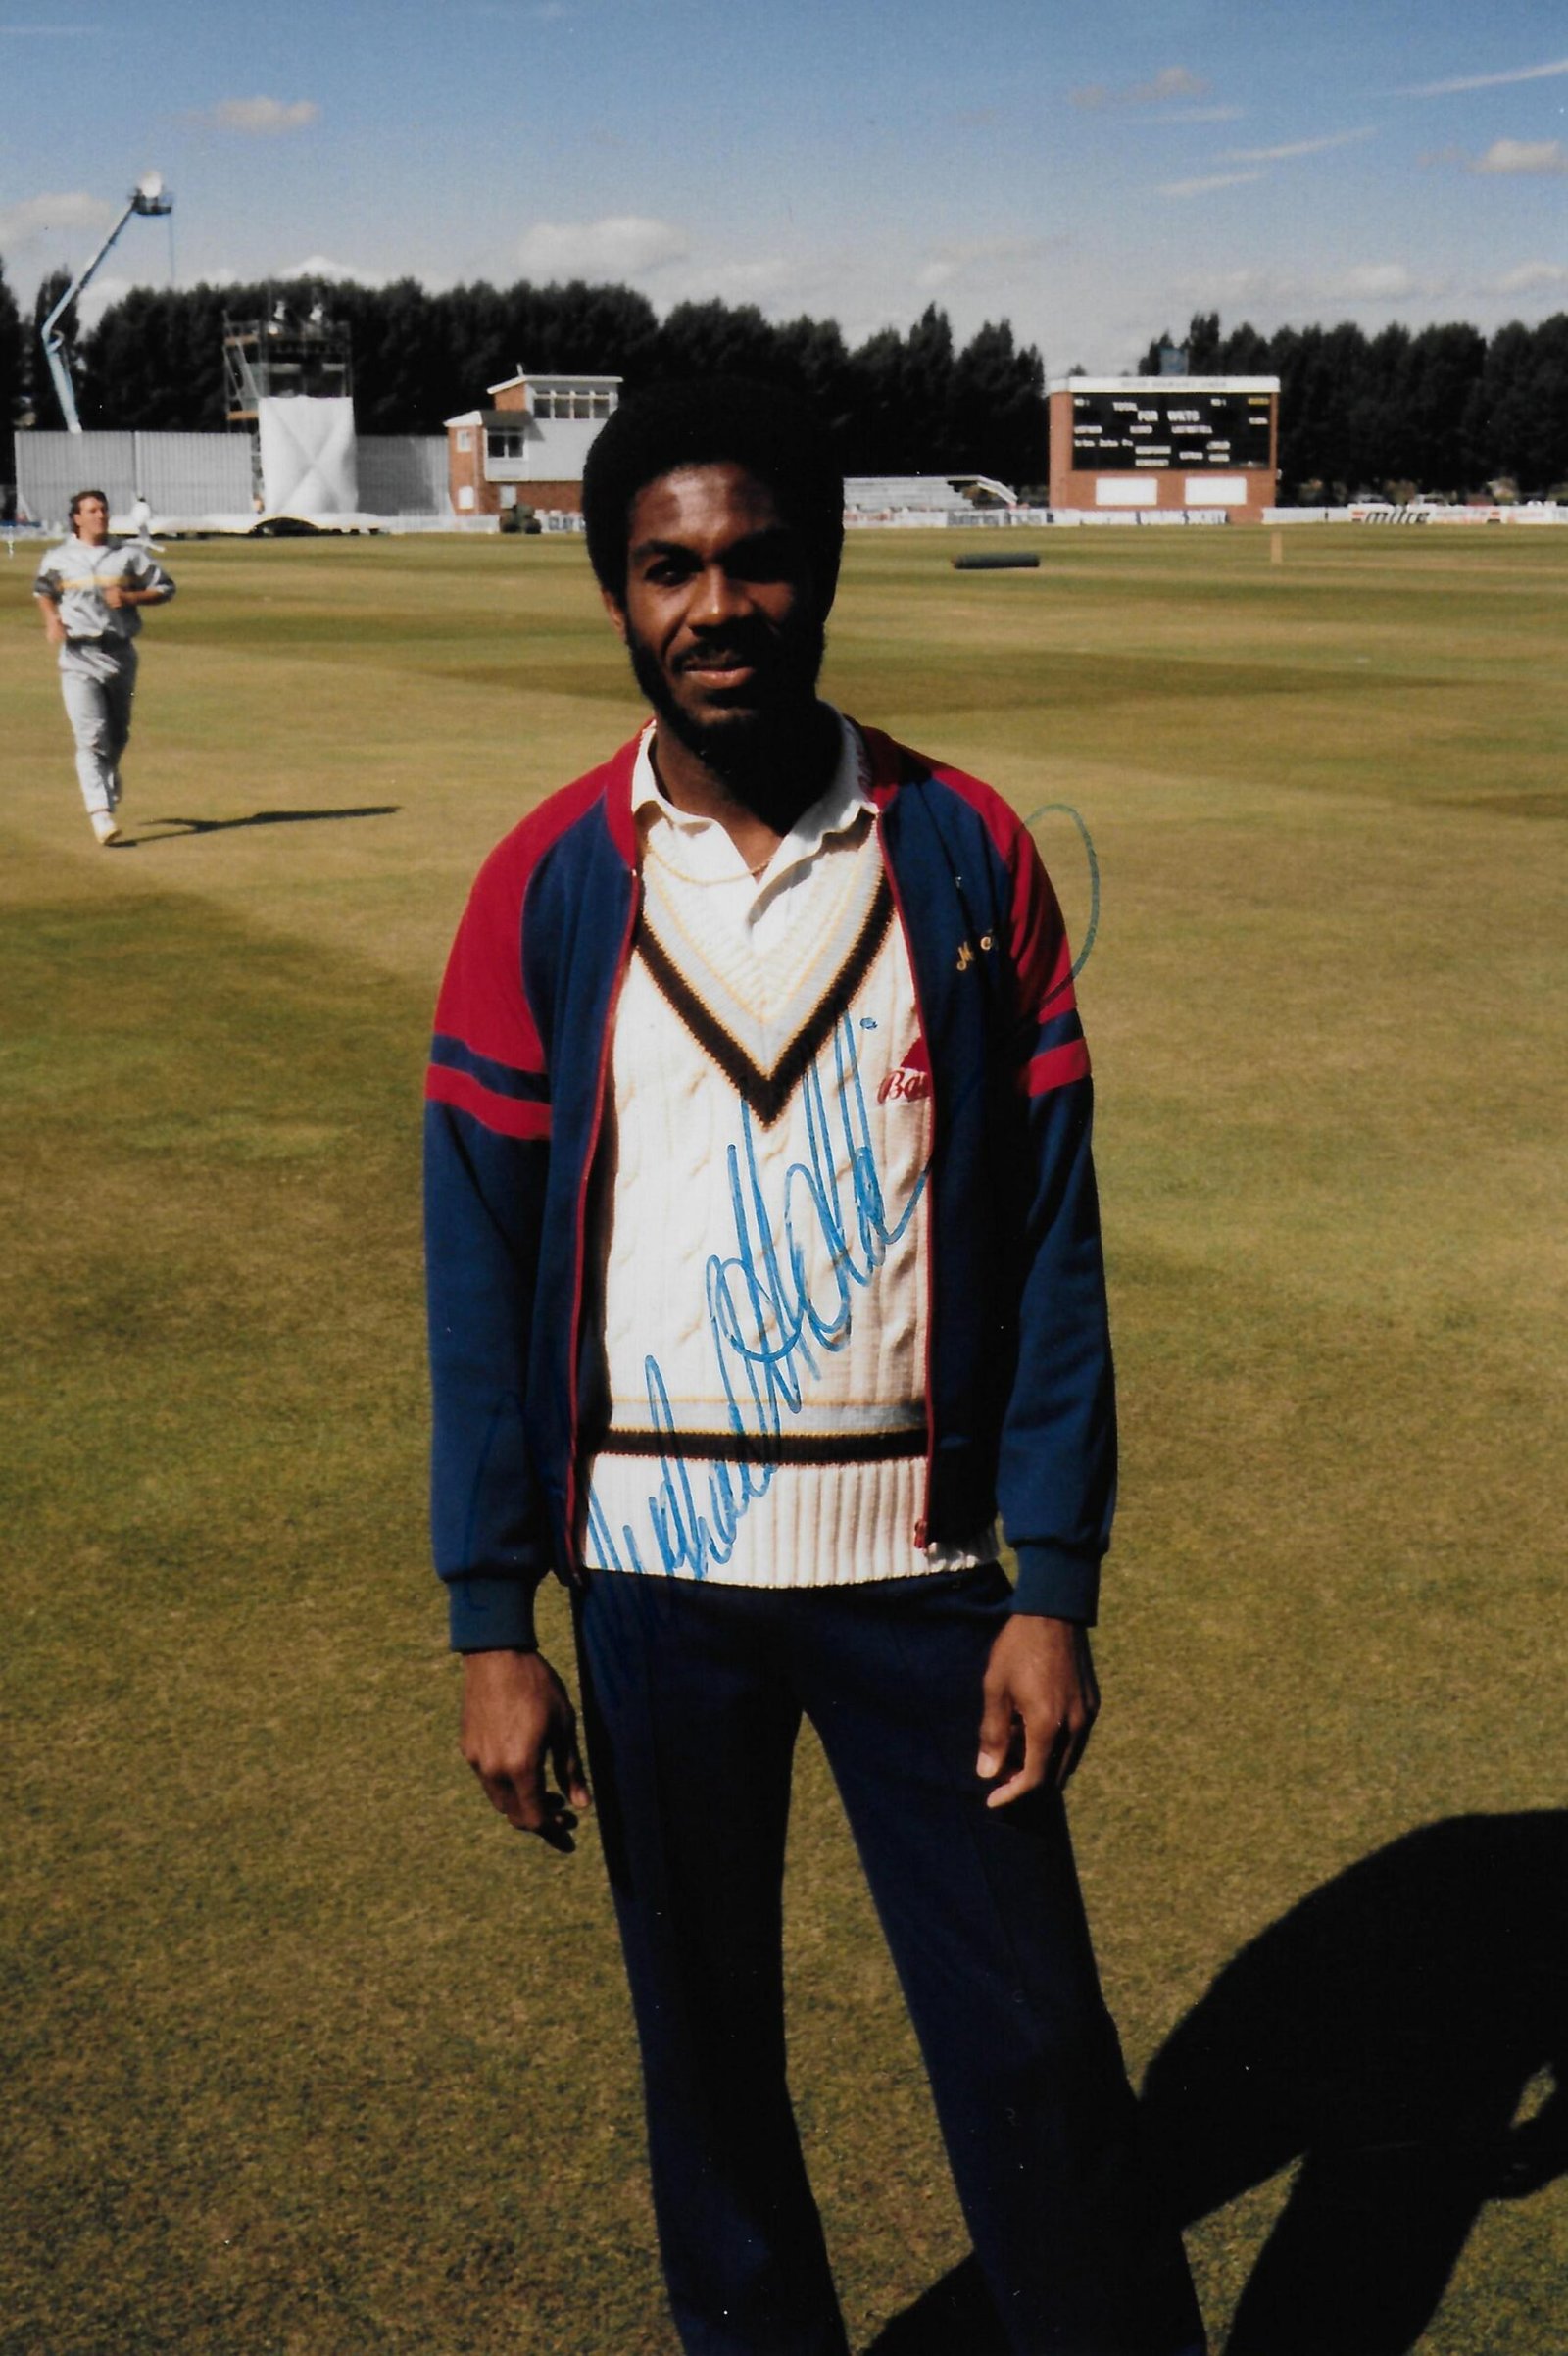 In his five-test series against England, Michael Holding captured 96 of his 249 wickets and, in addition, produced two of the finest displays of fast bowling prowess.